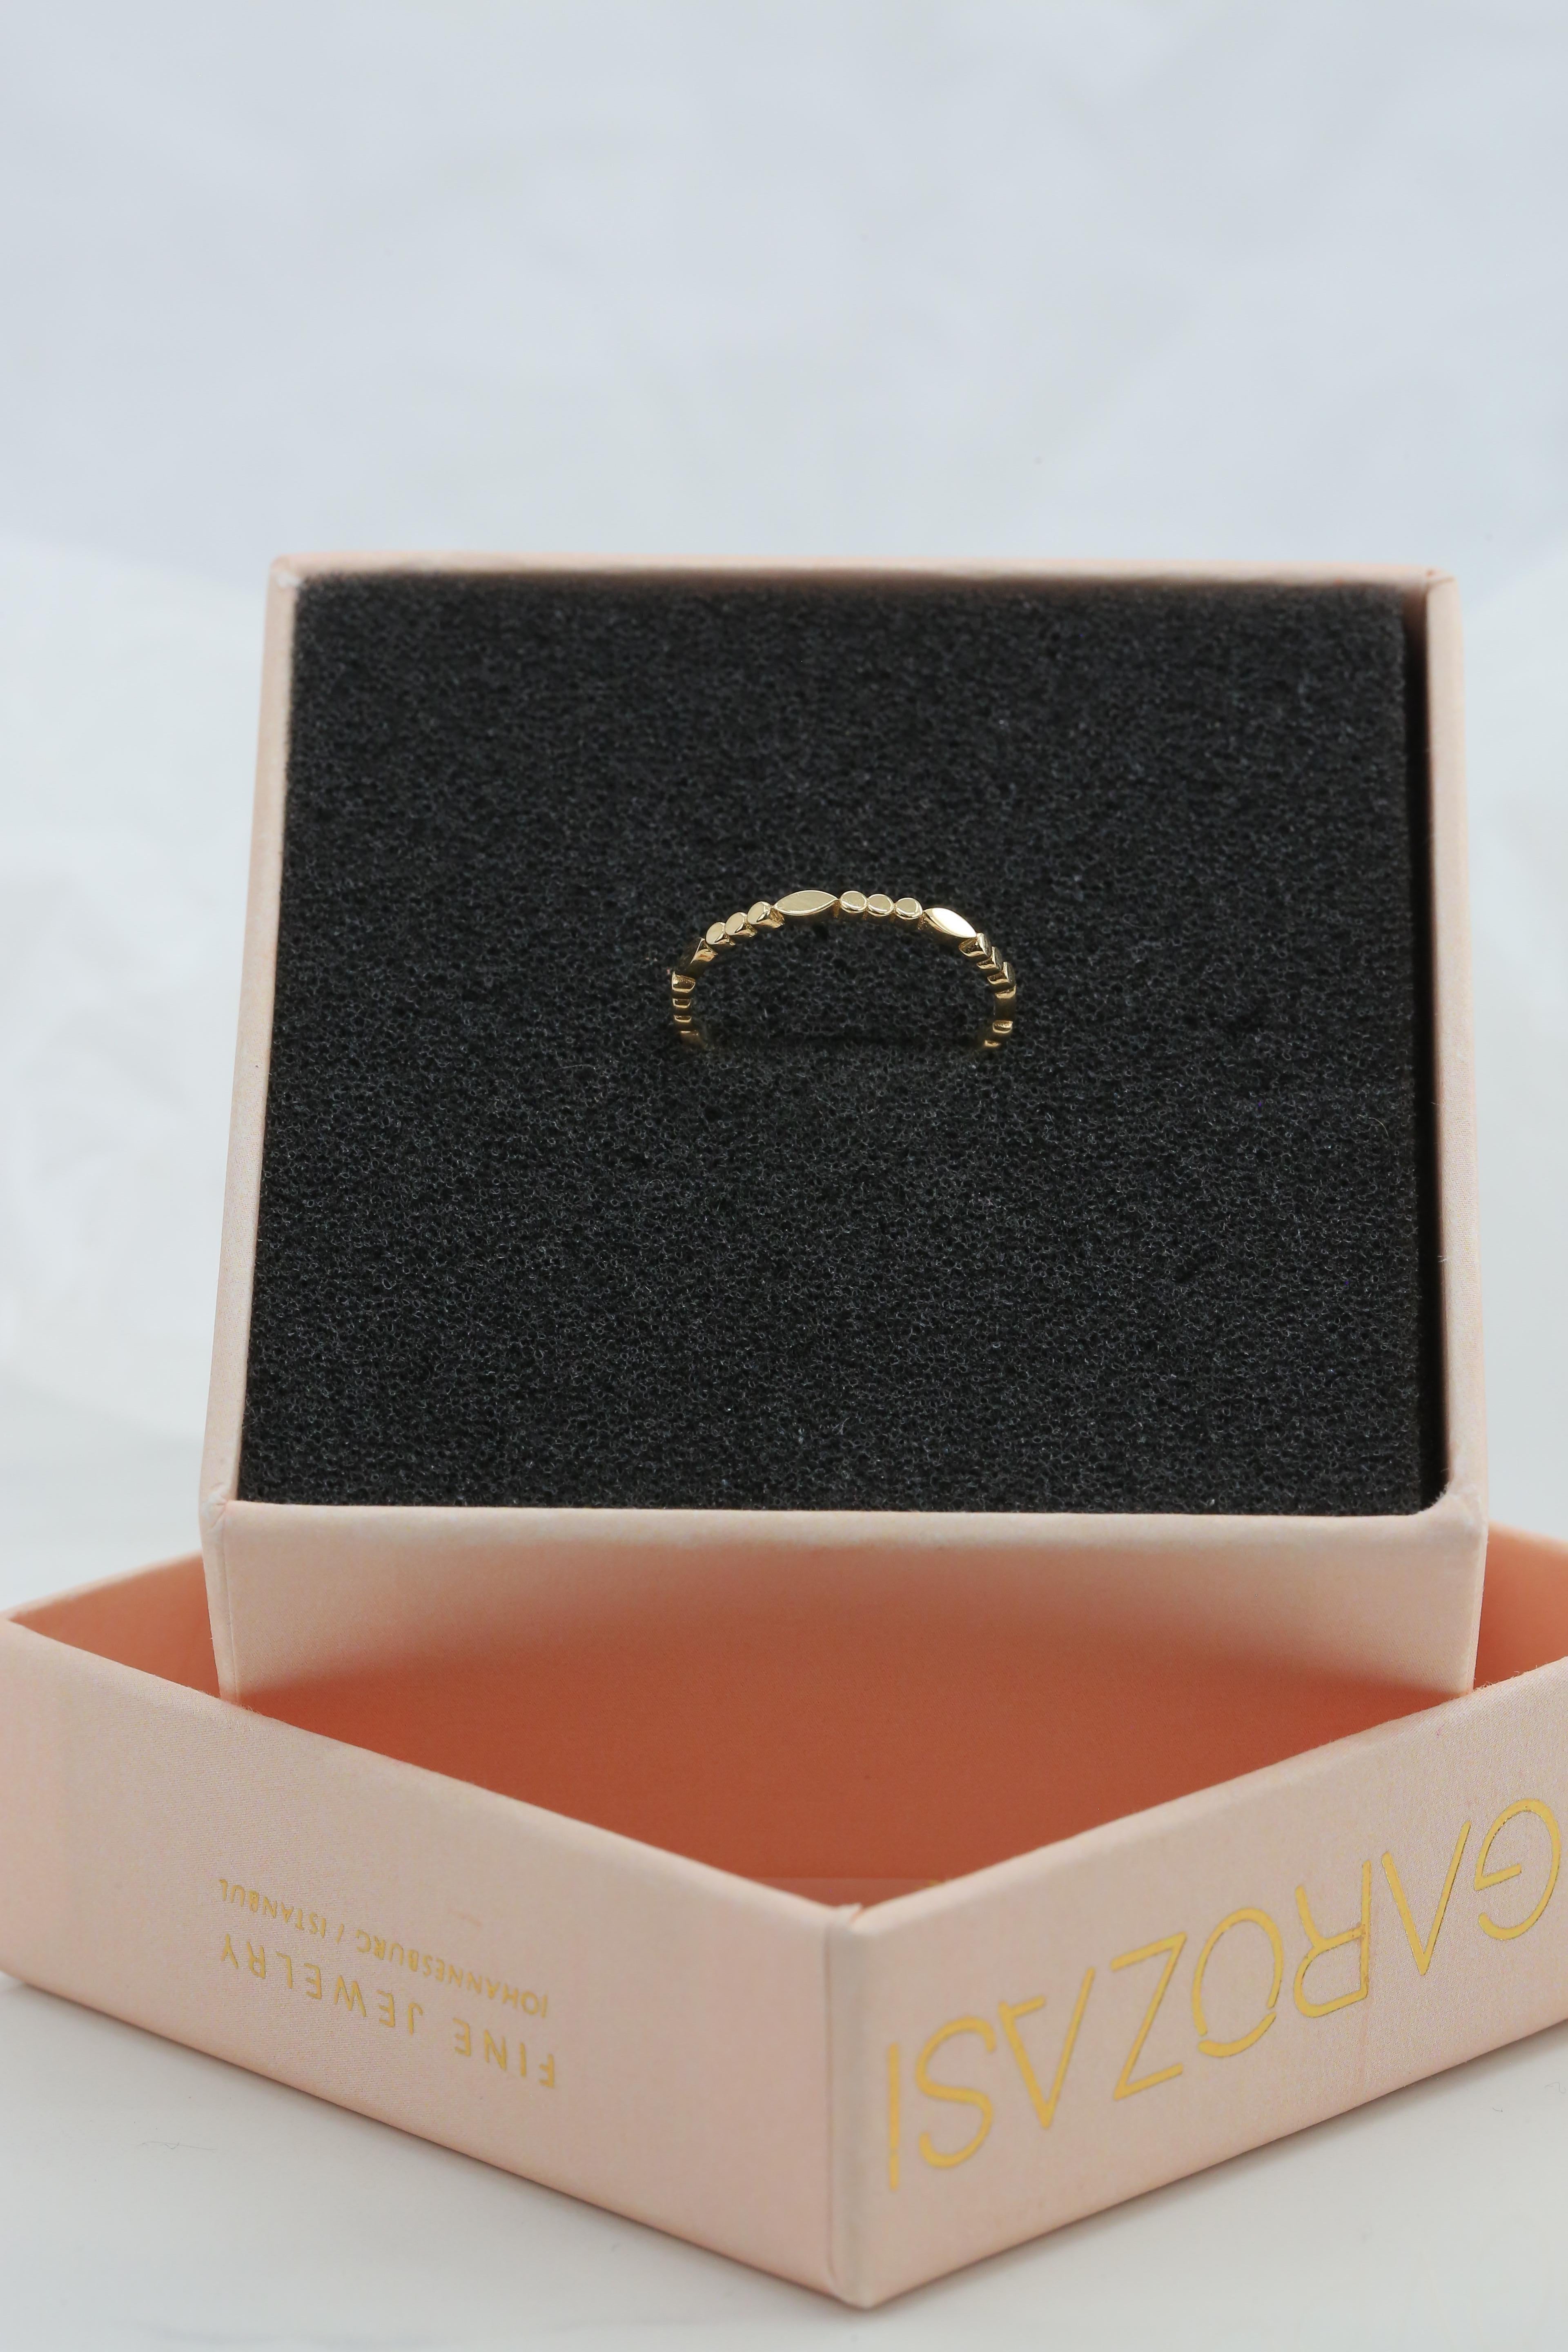 For Sale:  14 K Solid Gold Round Dot Ring Chain Link Ring, Modern Minimal Band Ring 4